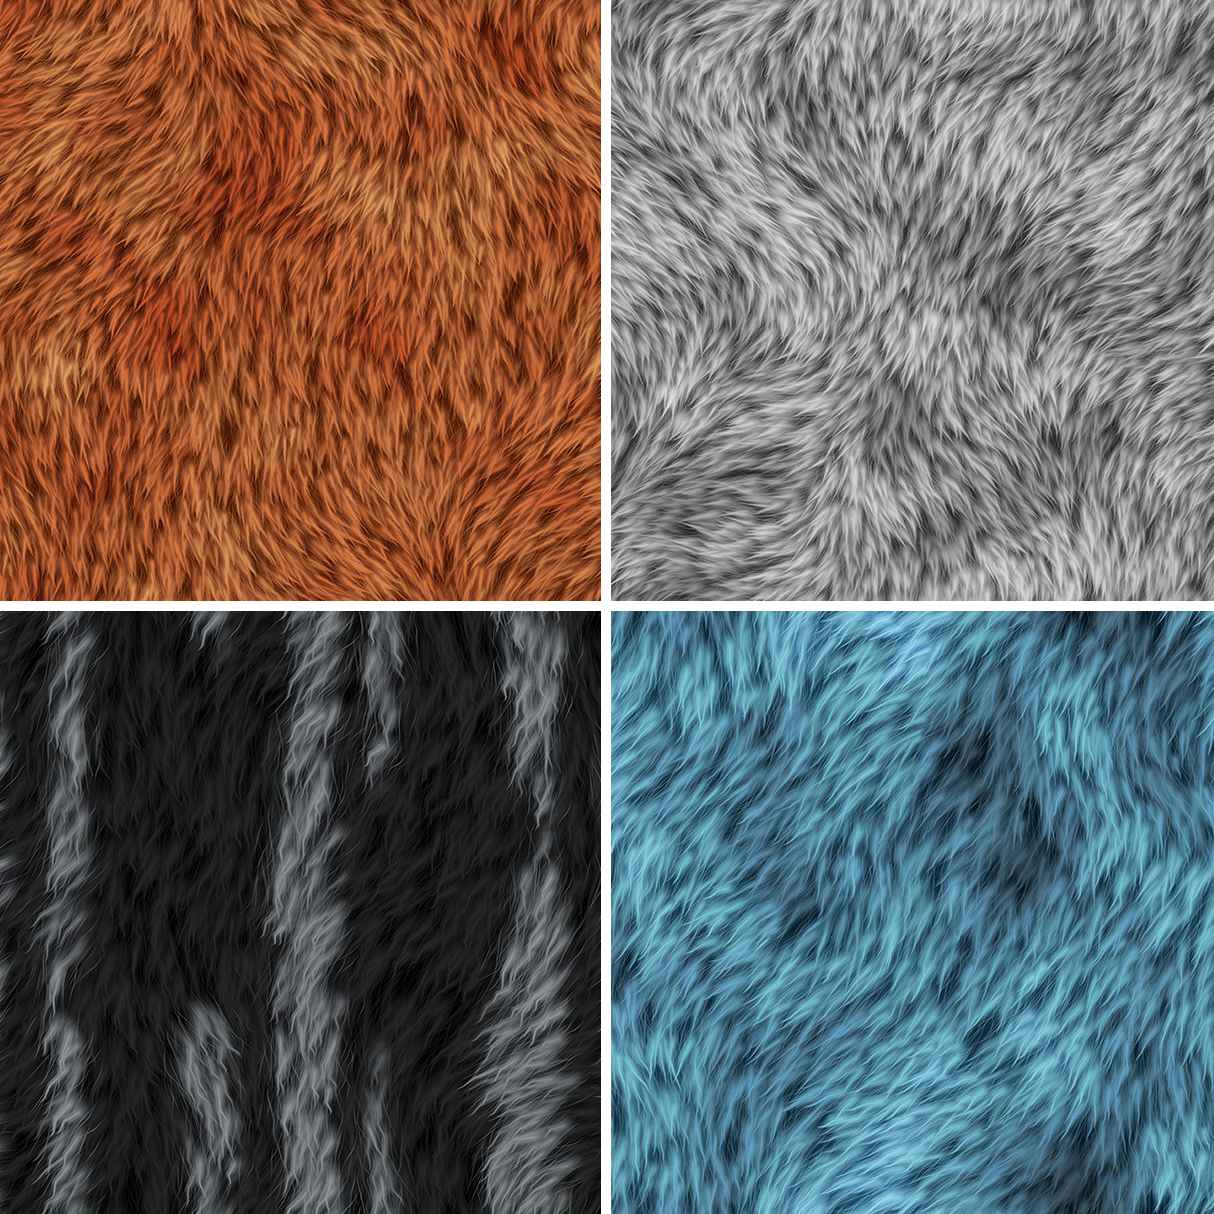 Black fur texture. Seamless texture ore background. Fabric fur t - Stock  Image - Everypixel